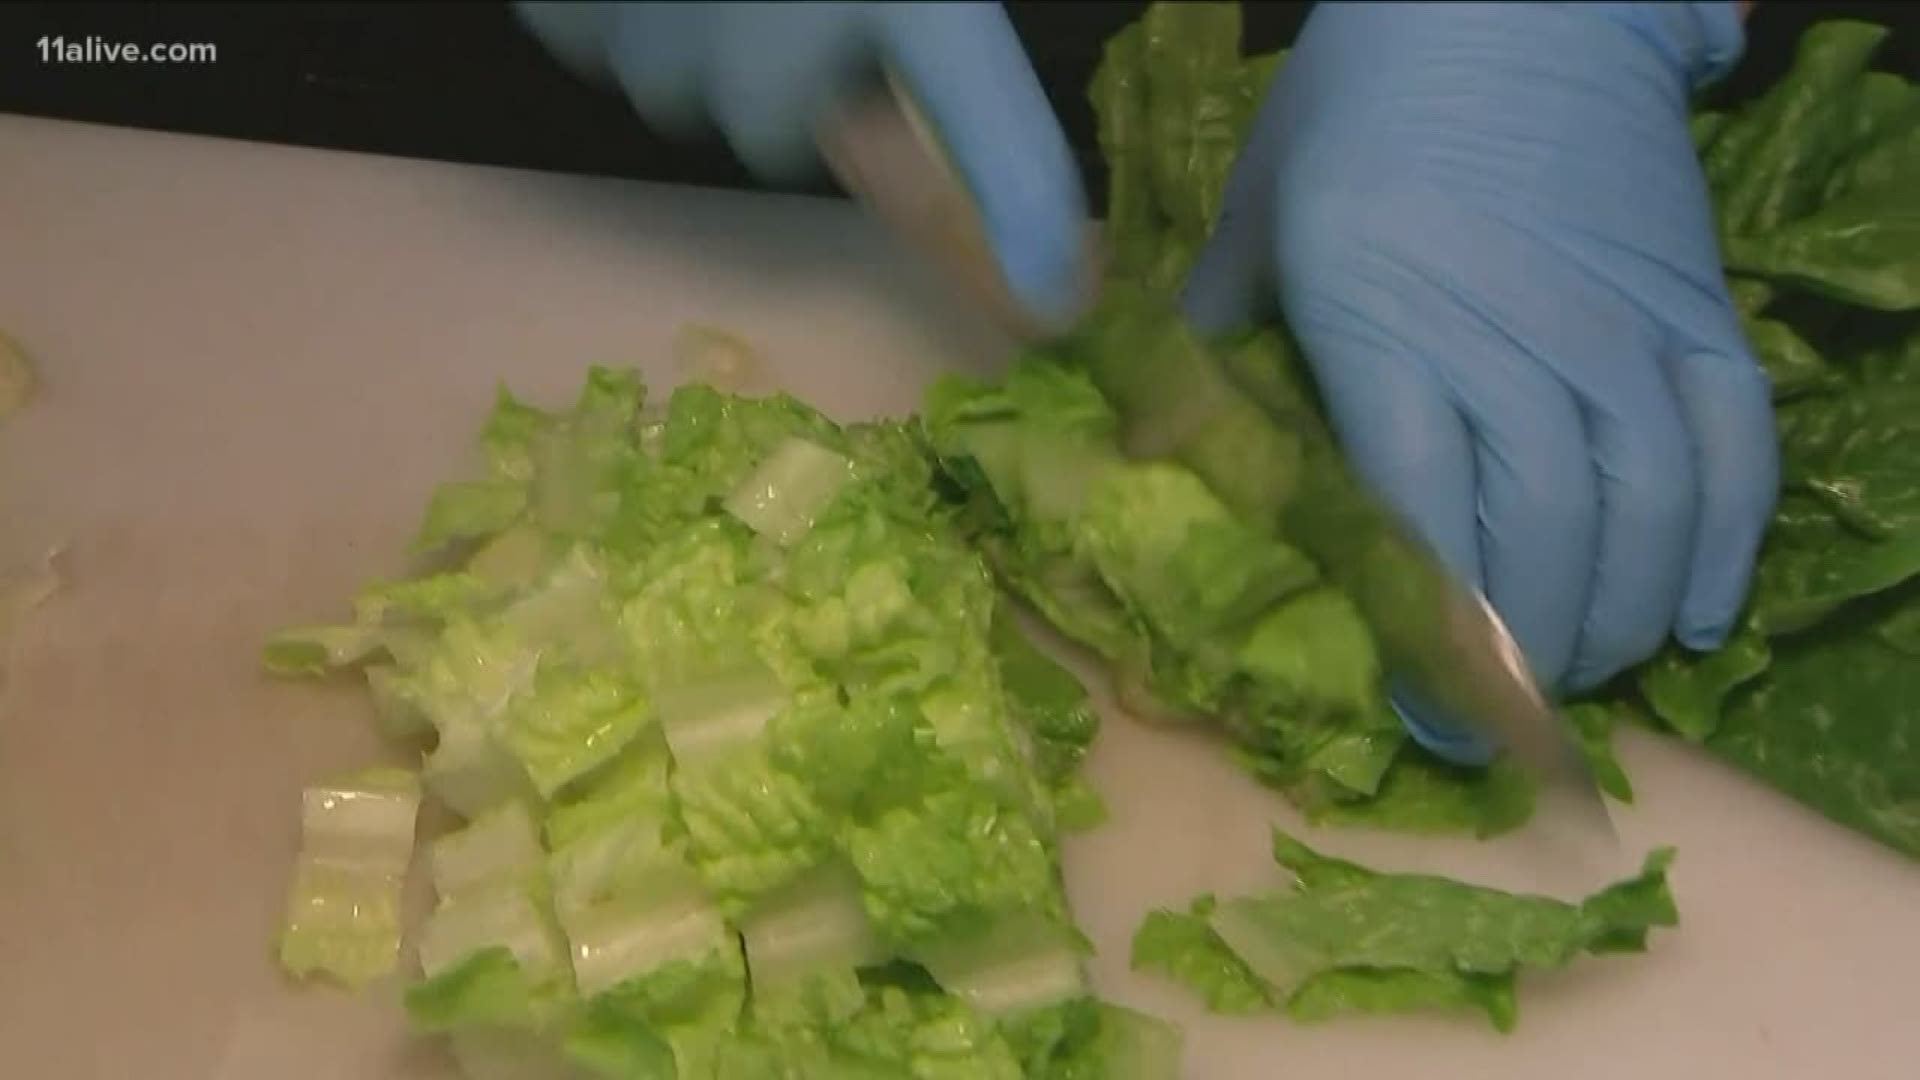 The most current recall warns consumers not to eat romaine from Salinas, California